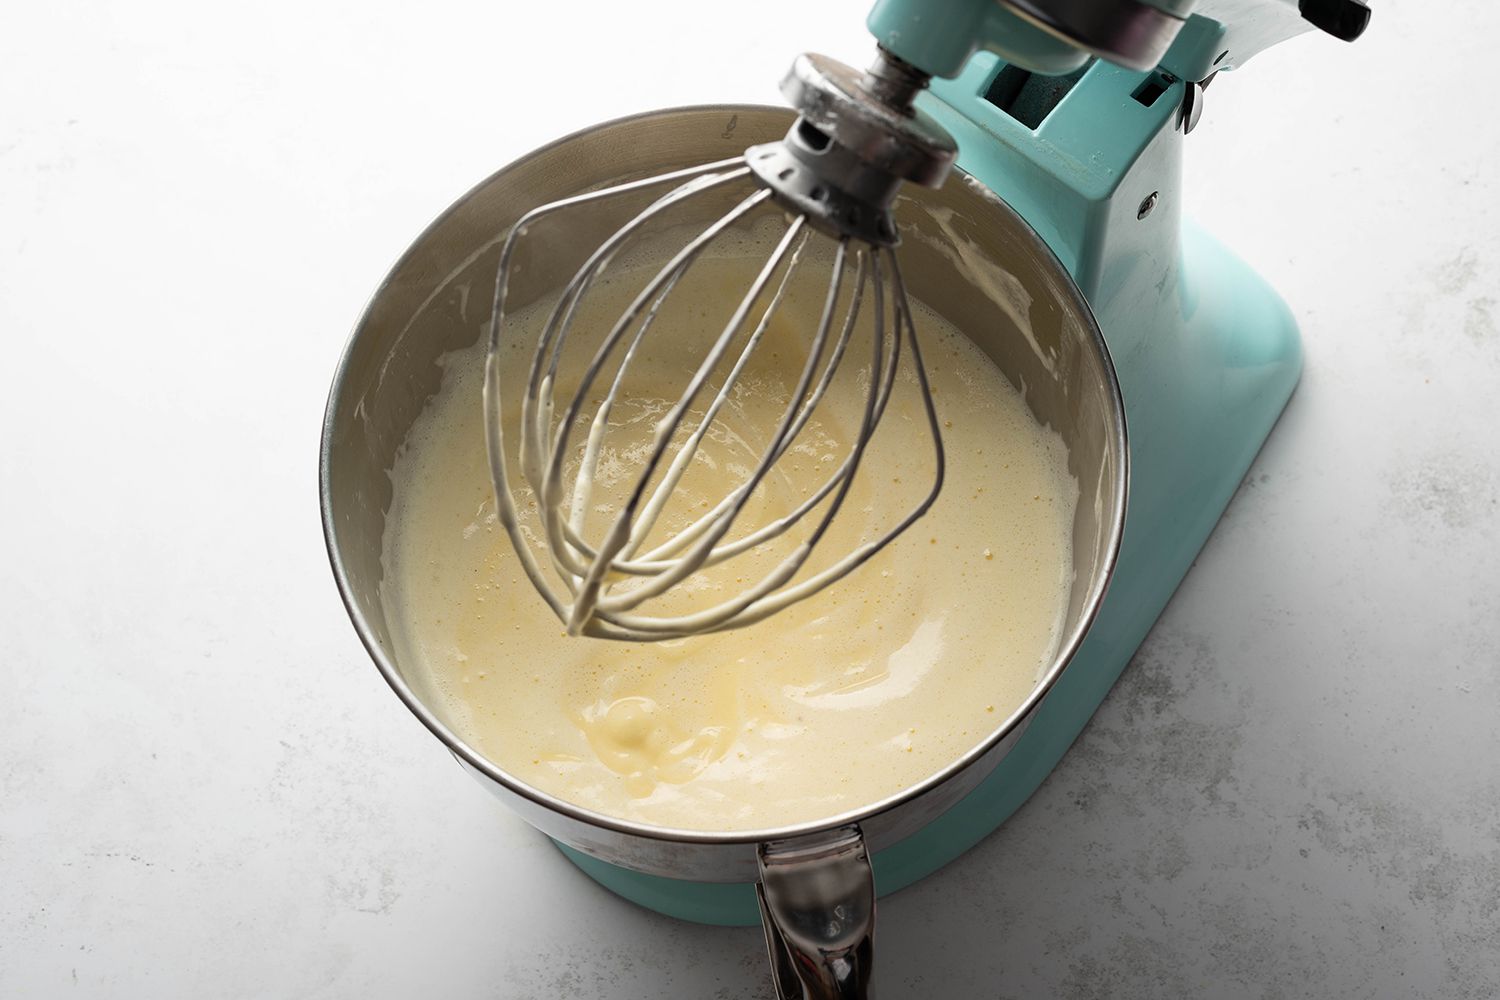 Whipped cream and pudding mixtures in a stand mixer 